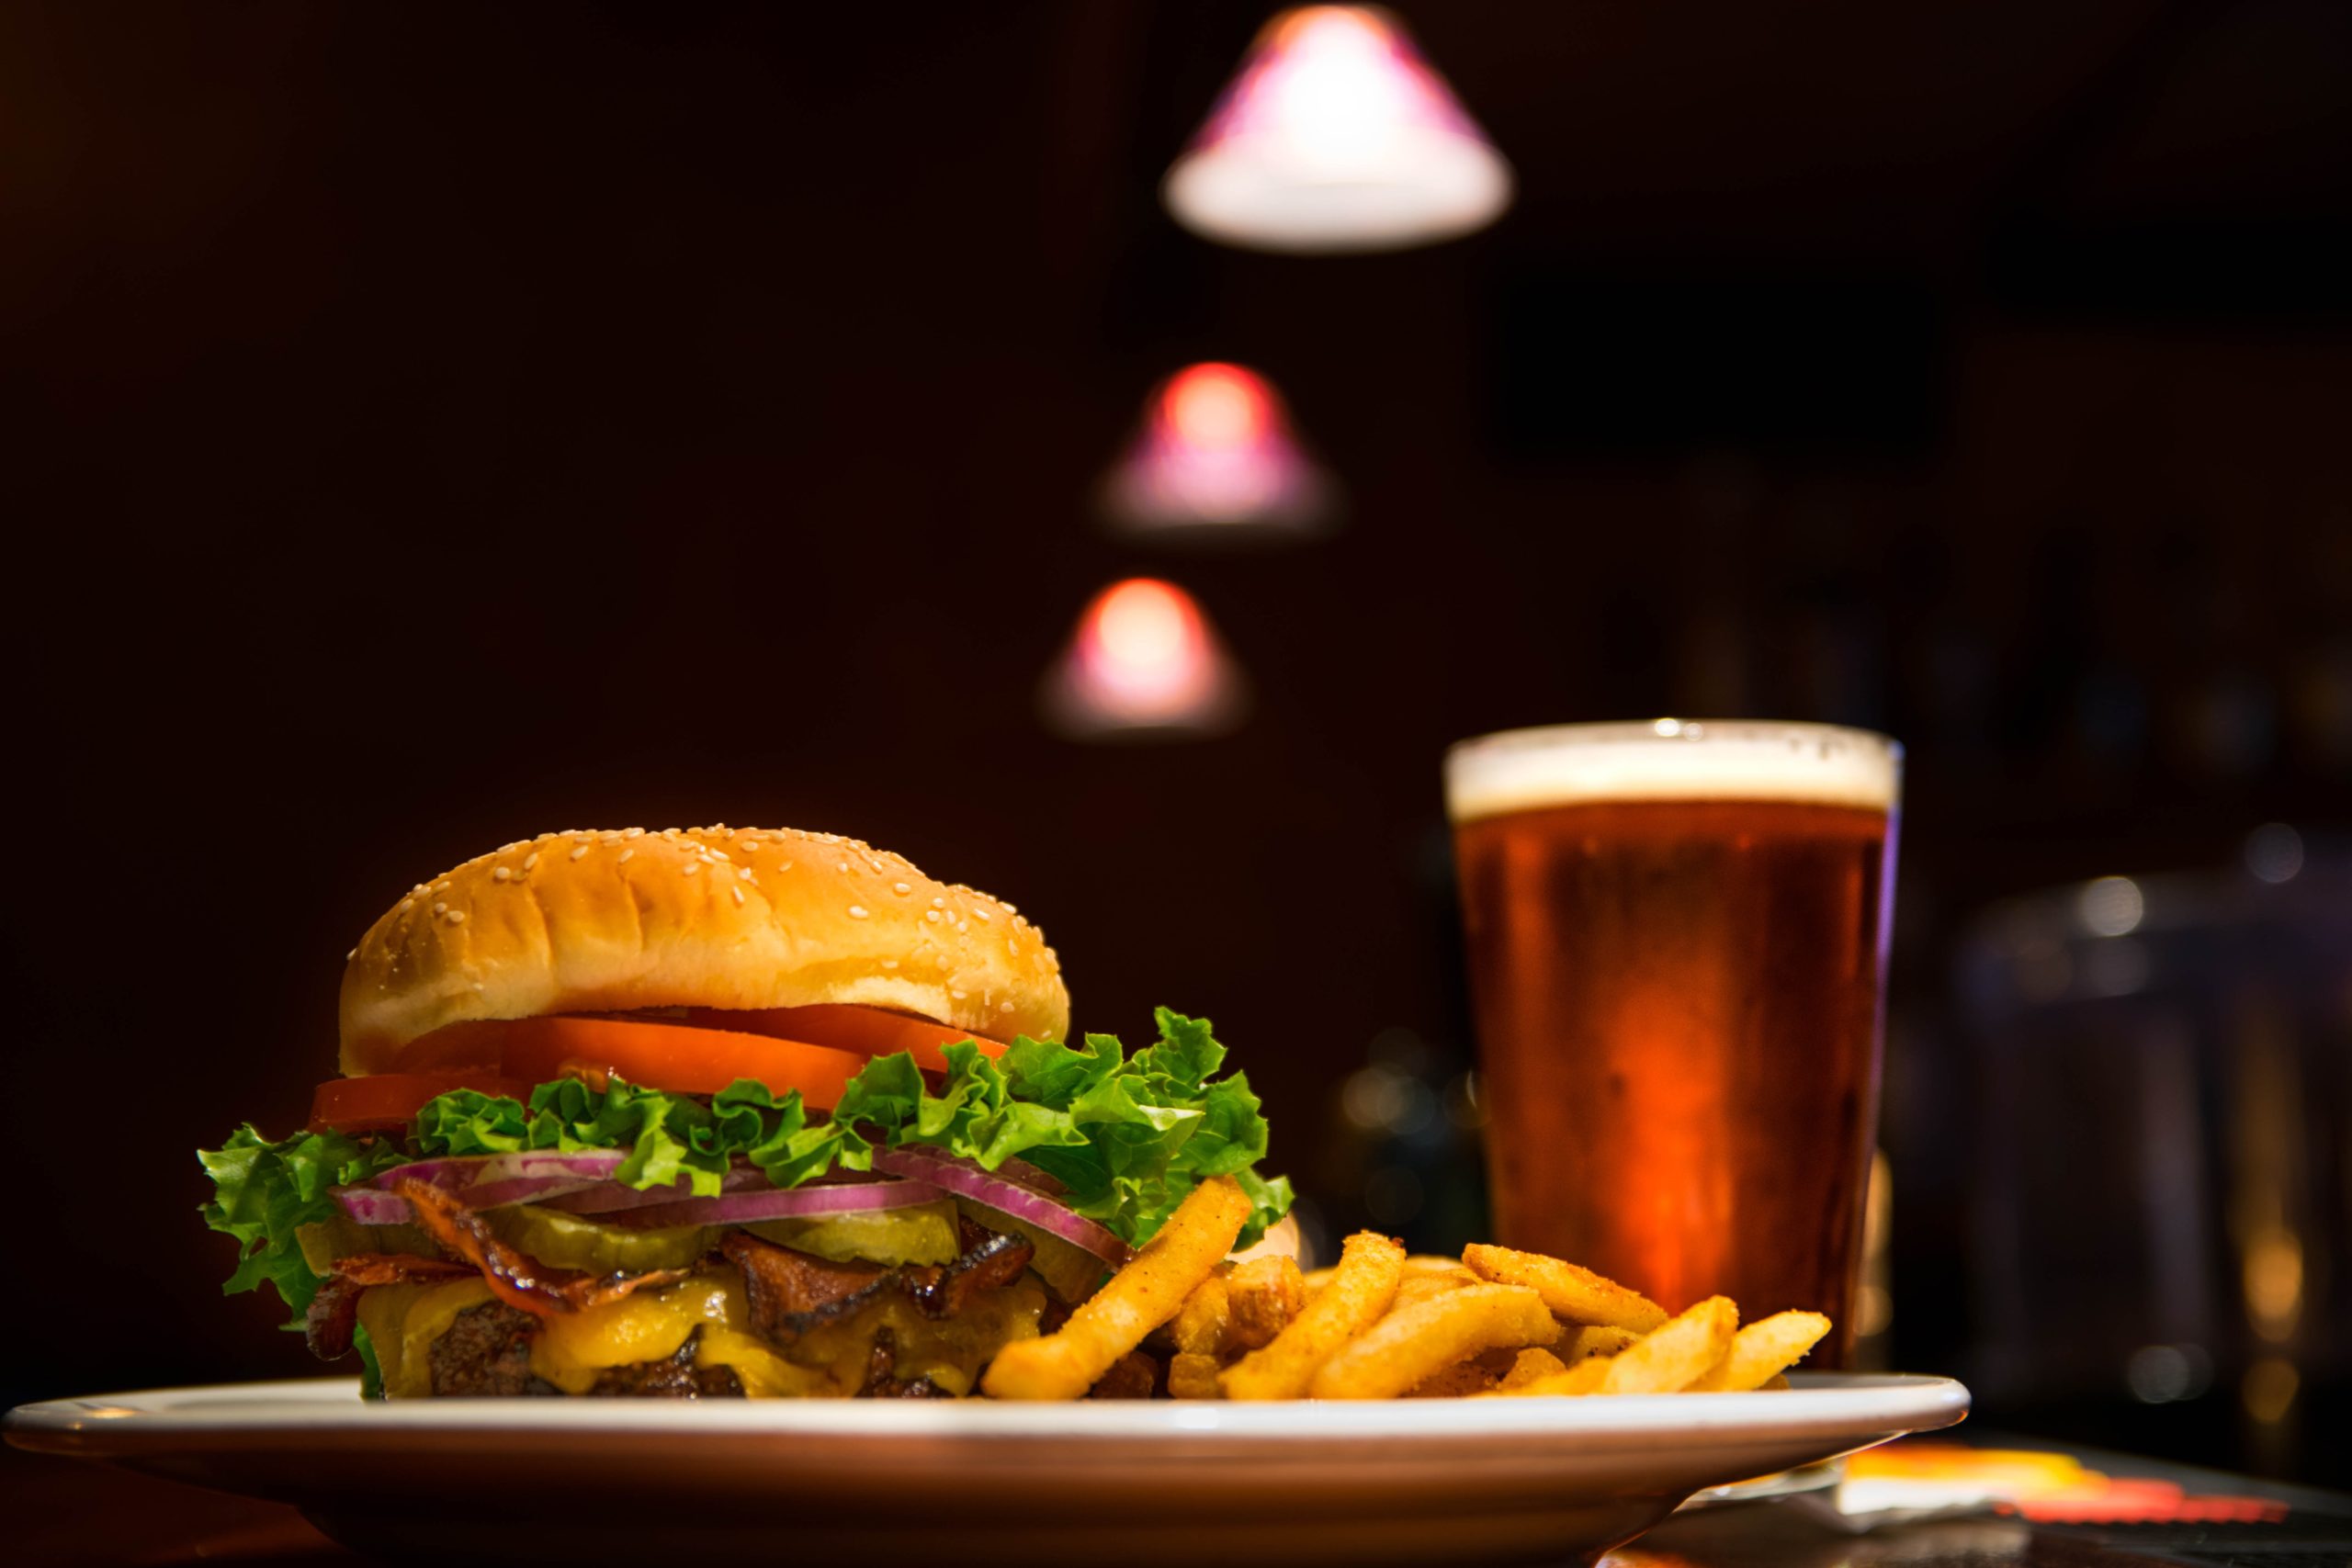 A burger with lettuce, tomato, onion, bacon, cheese, a side of fries and a beer